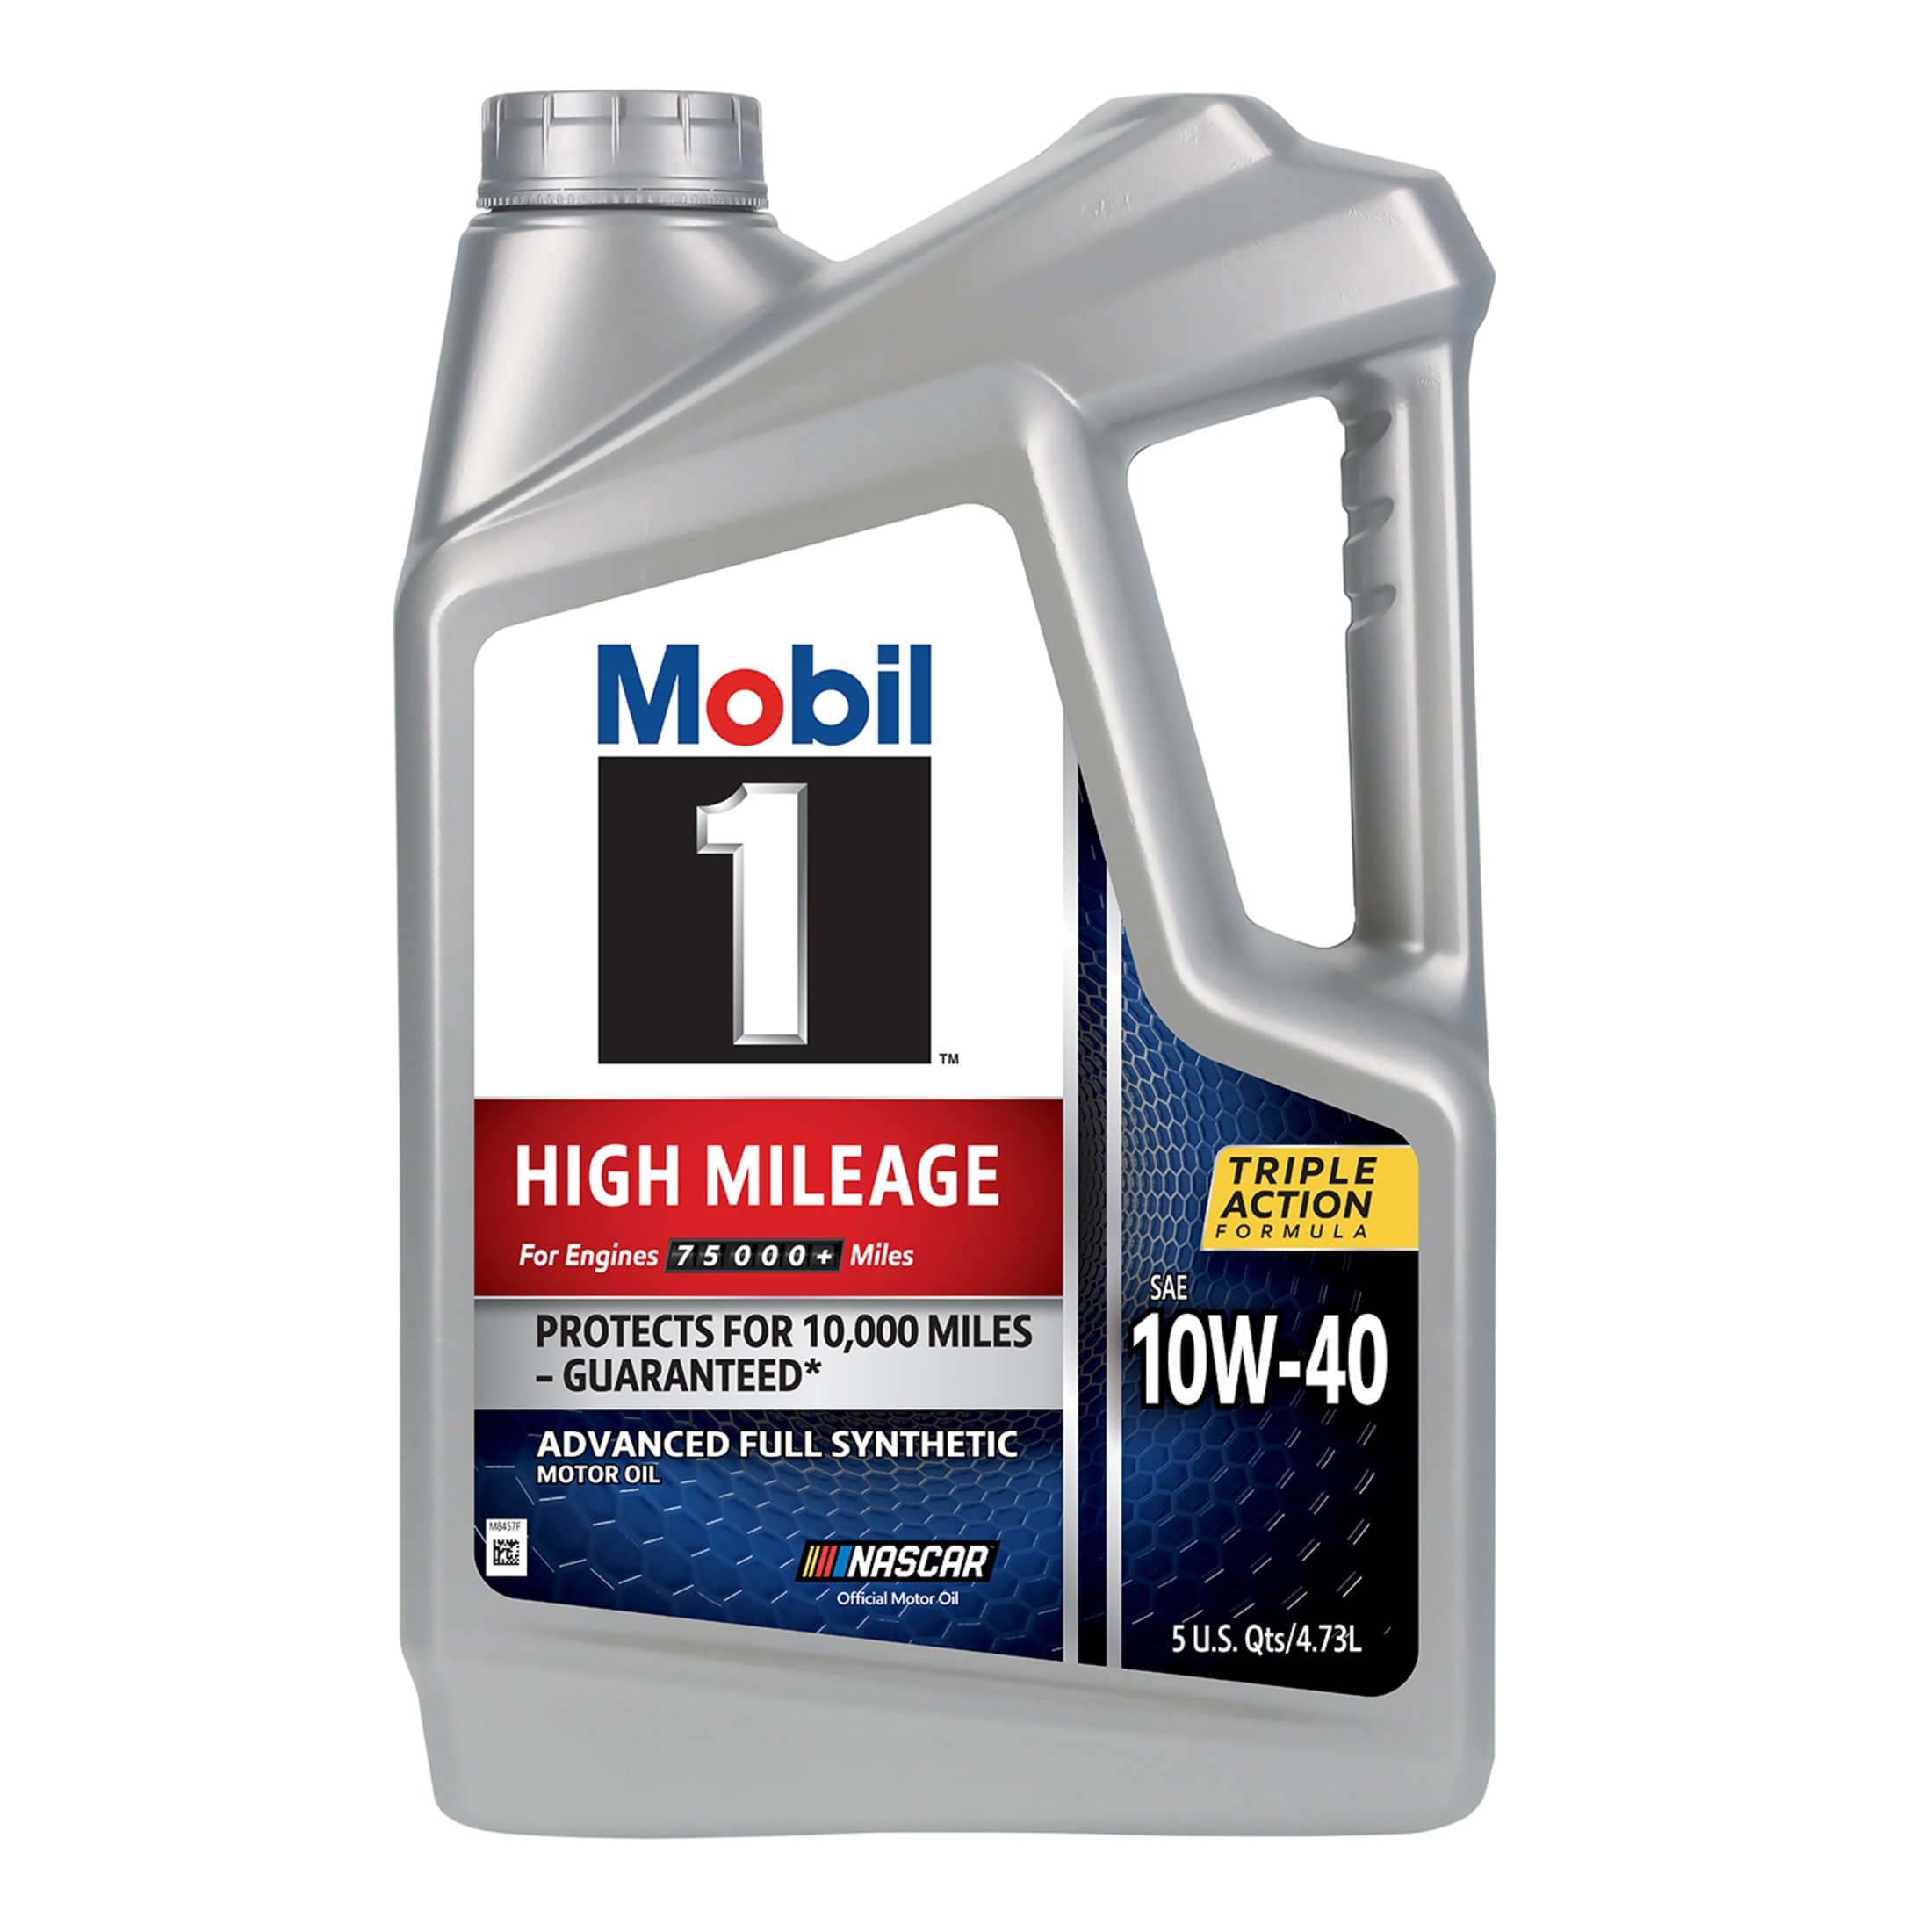 Mobil 1 High Mileage Full Synthetic Motor Oil 10W-40, 5 Quart - image 1 of 9